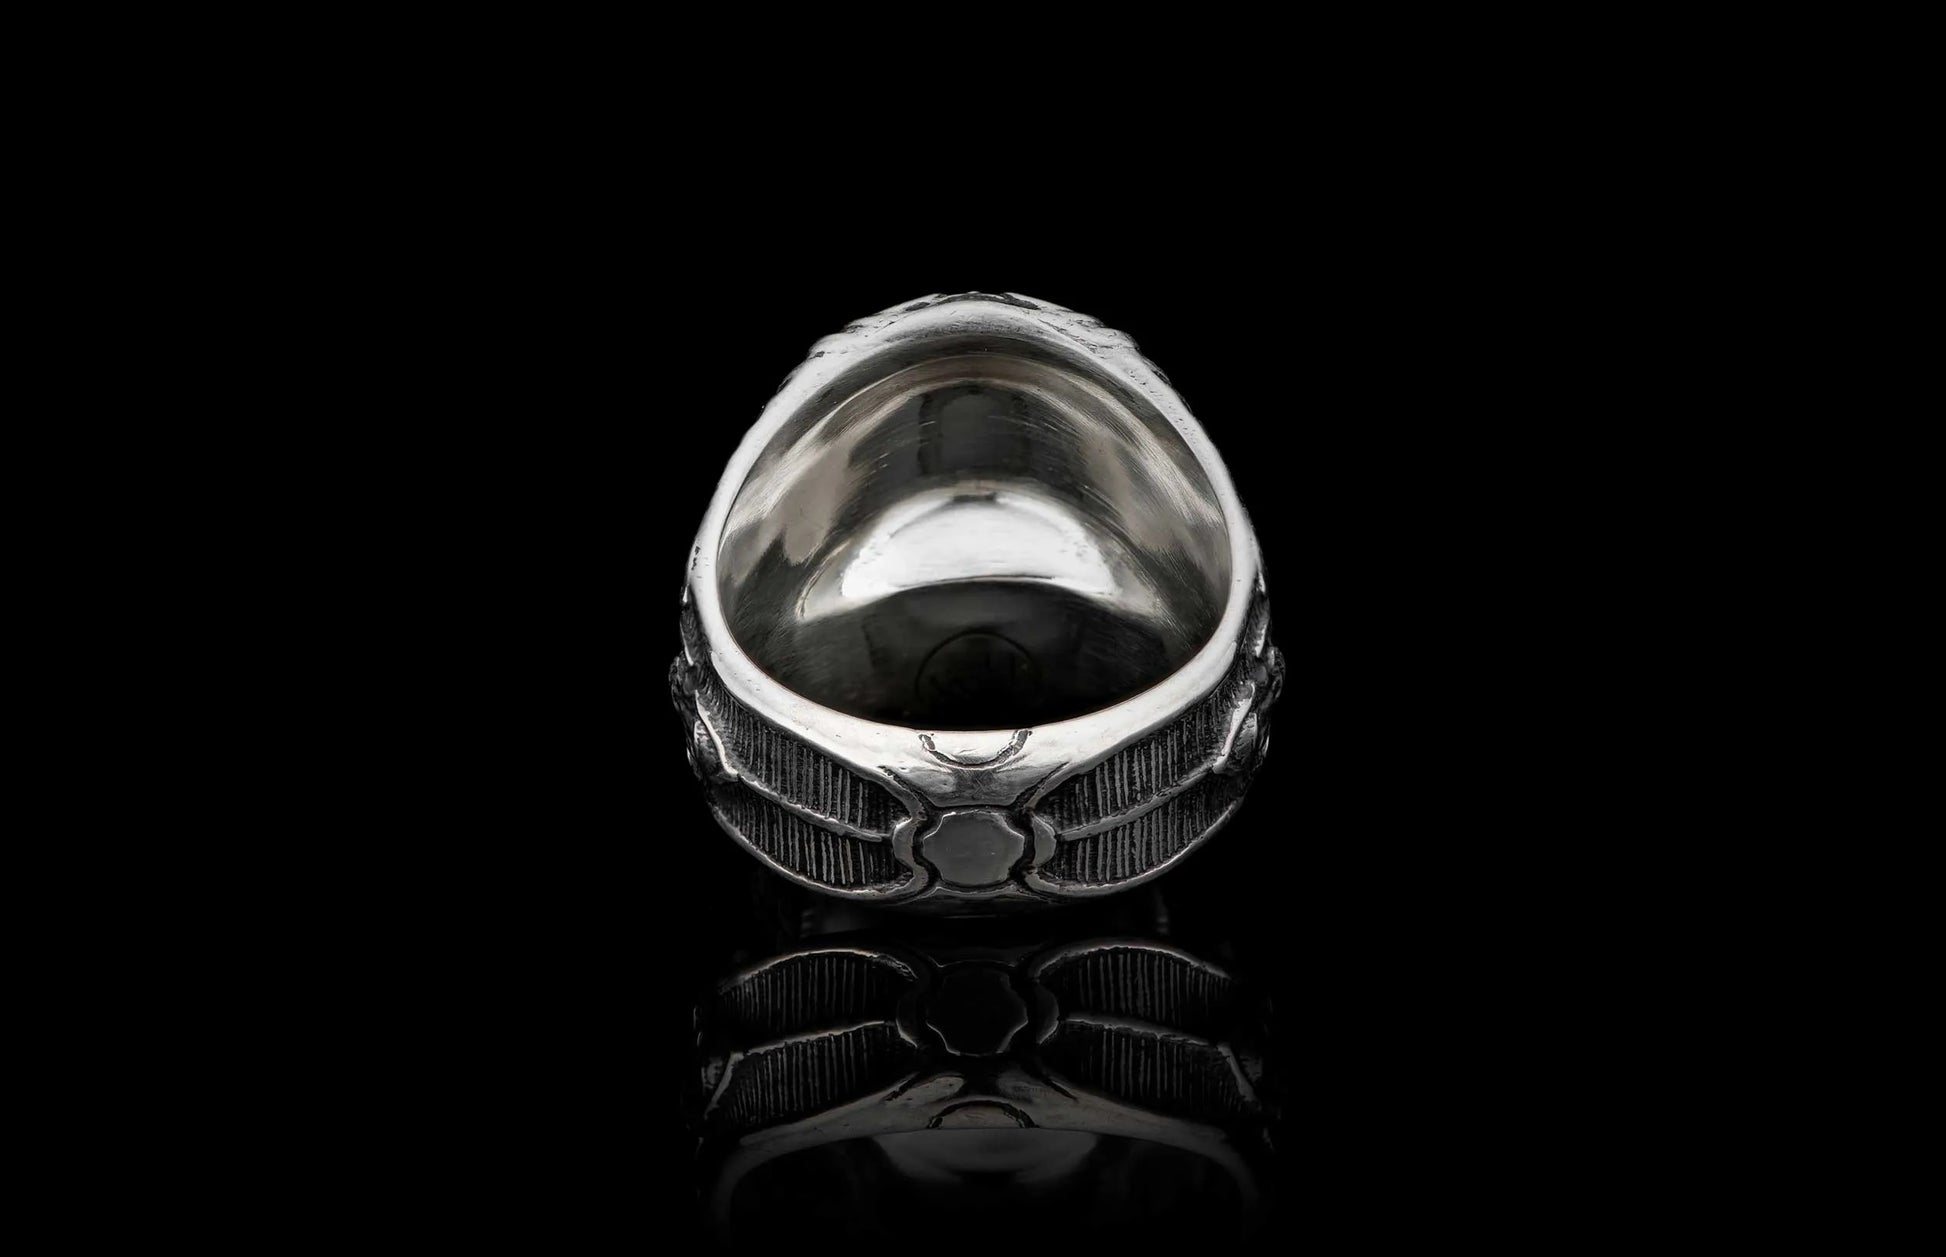 Gents Silver Ring - Gents Silver Ring